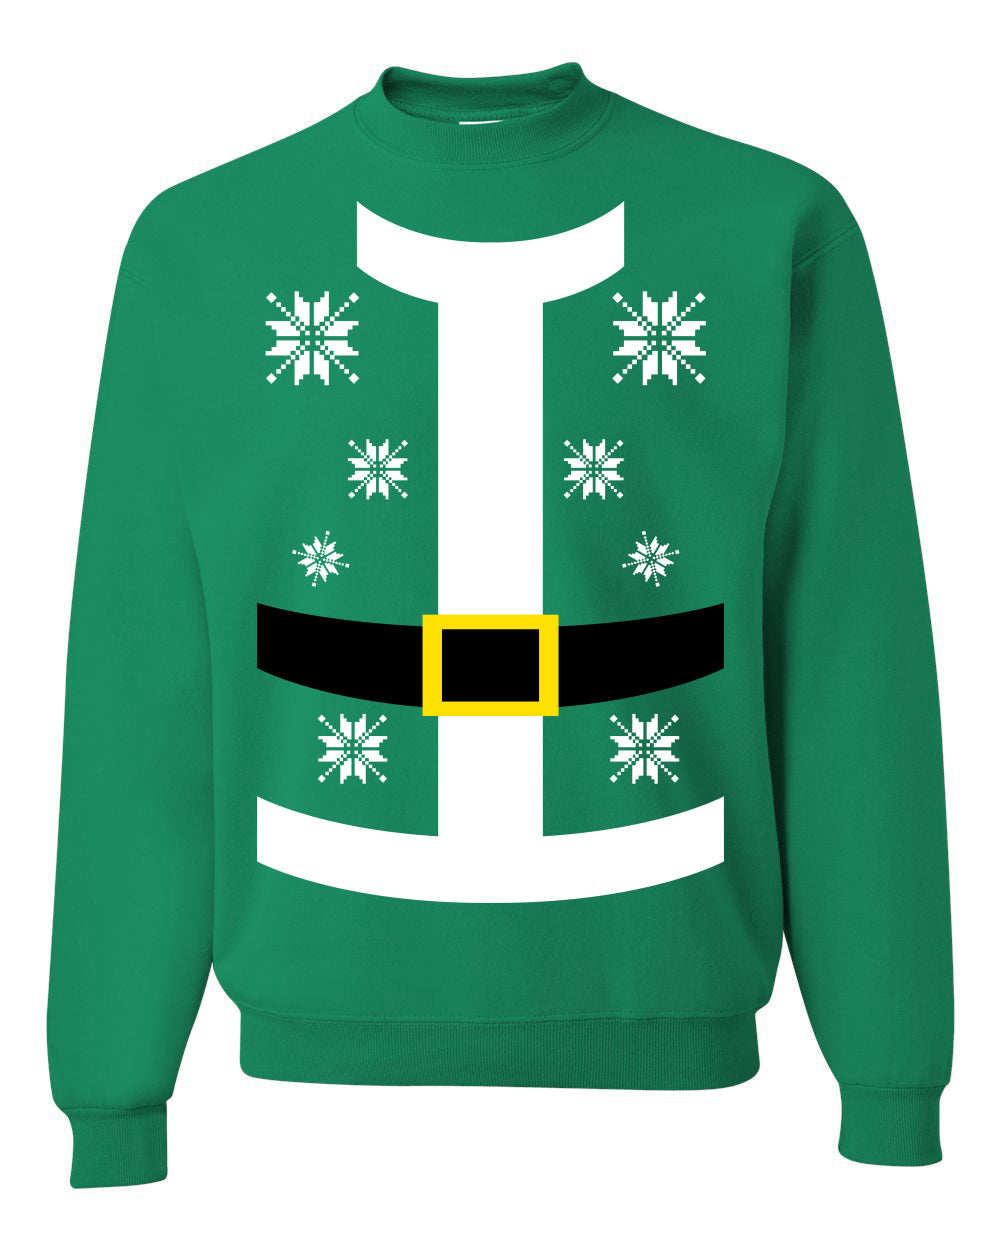 Jolly Santa Suit Winter Candy Cane Merry Ugly Christmas Sweater Unisex Crewneck Graphic Sweatshirt